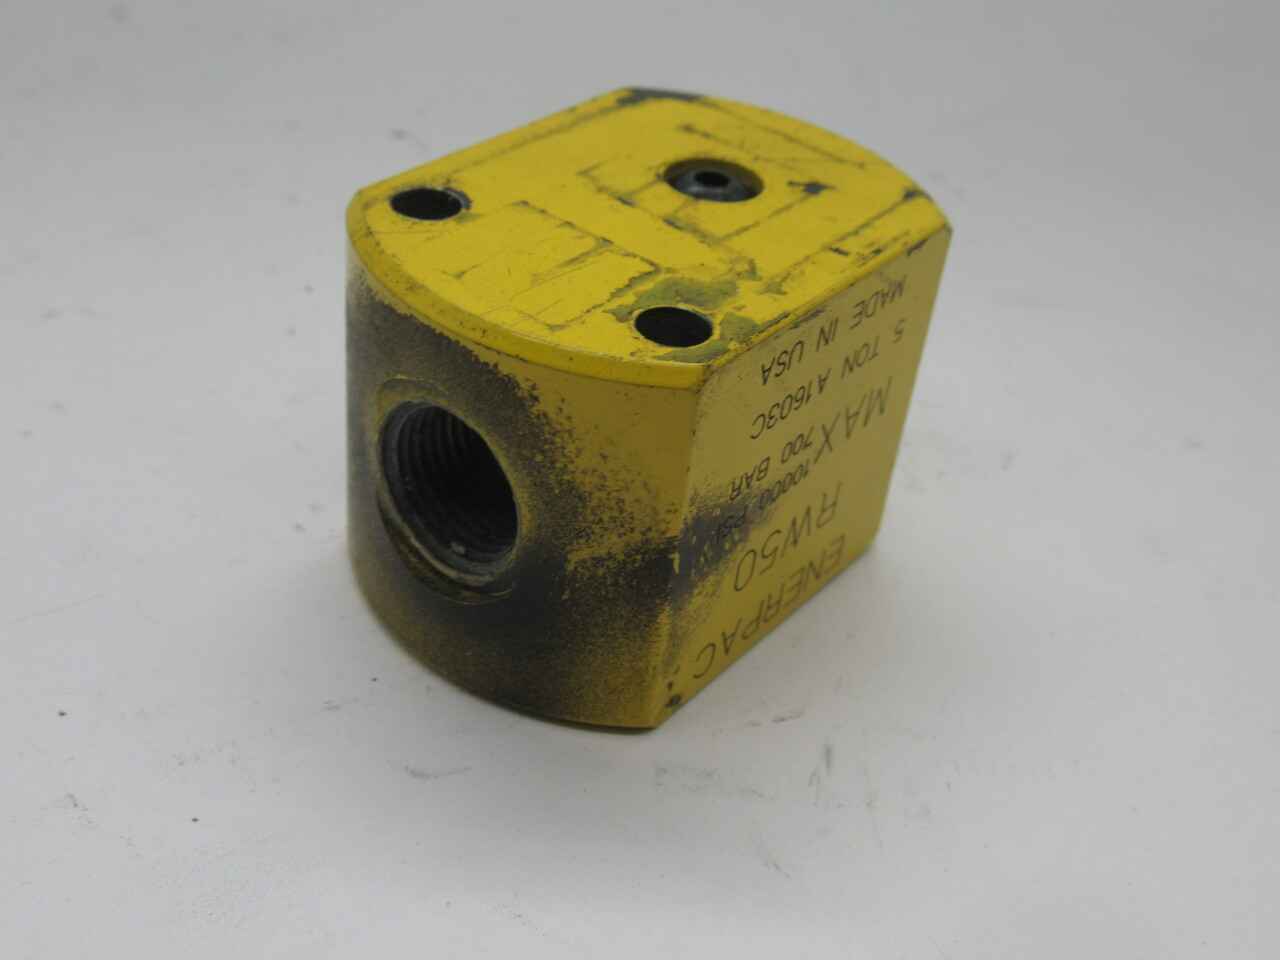 Enerpac RW50 General Purpose Hydraulic Cylinder 0.62" Stroke *INK STAINED* USED